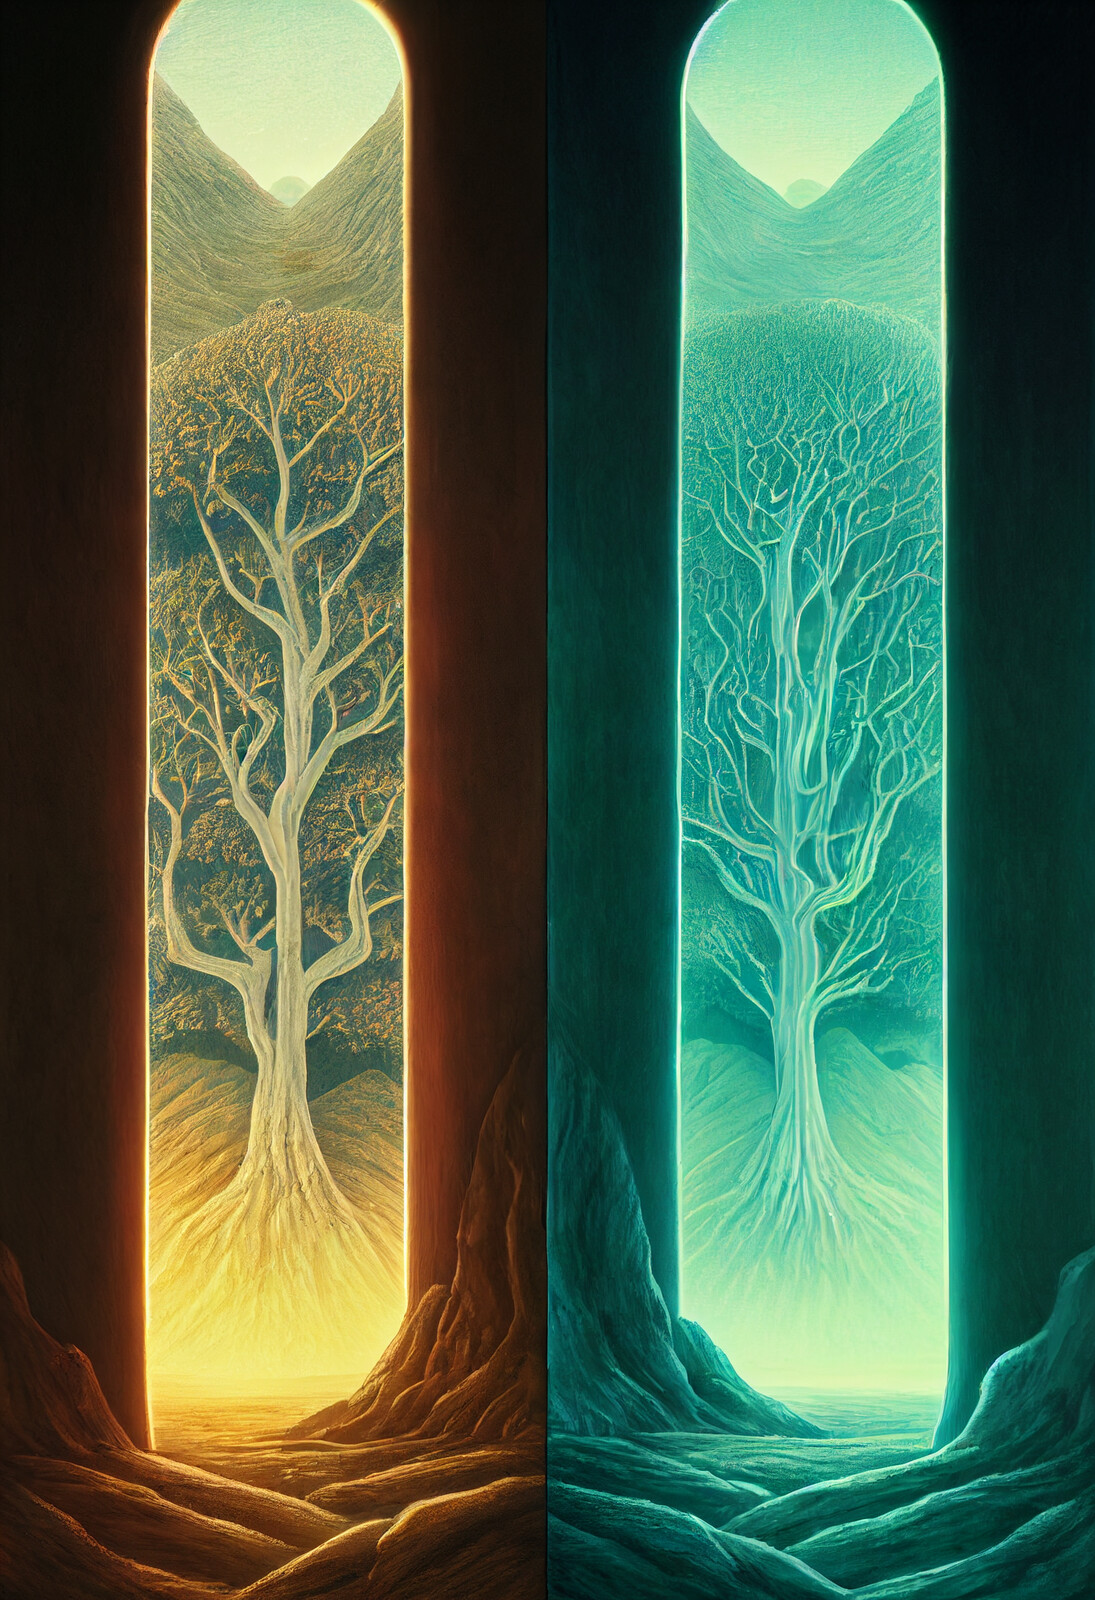 Telperion and Laurelin, the Two Trees of Valinor